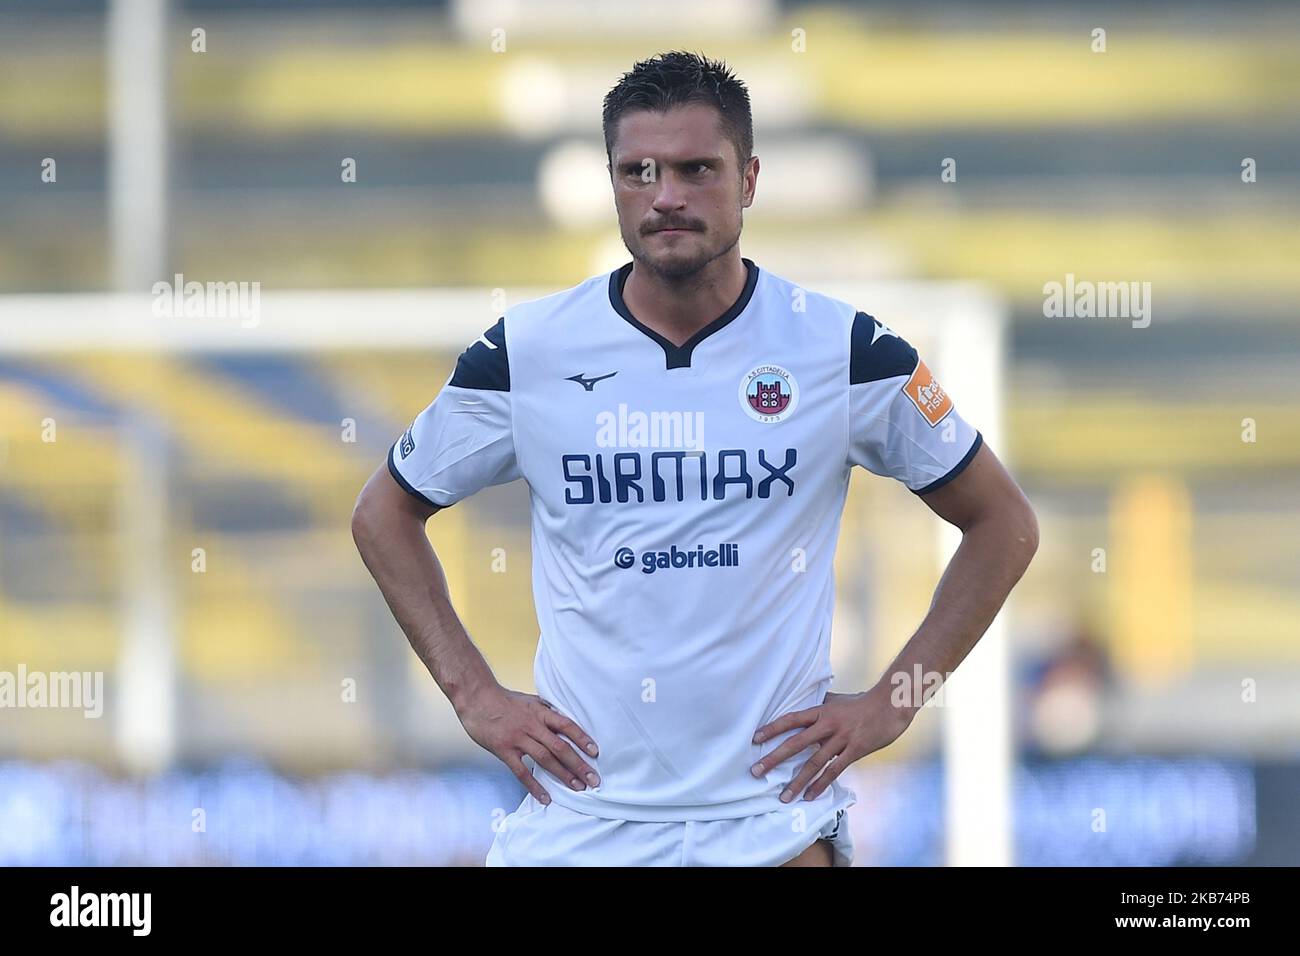 Romano Perticone of AS Cittadella during the Serie B match between Juve Stabia and AS Cittadella at Stadio Romeo Menti Castellammare di Stabia Italy on 28 September 2019. (Photo Franco Romano) Stock Photo